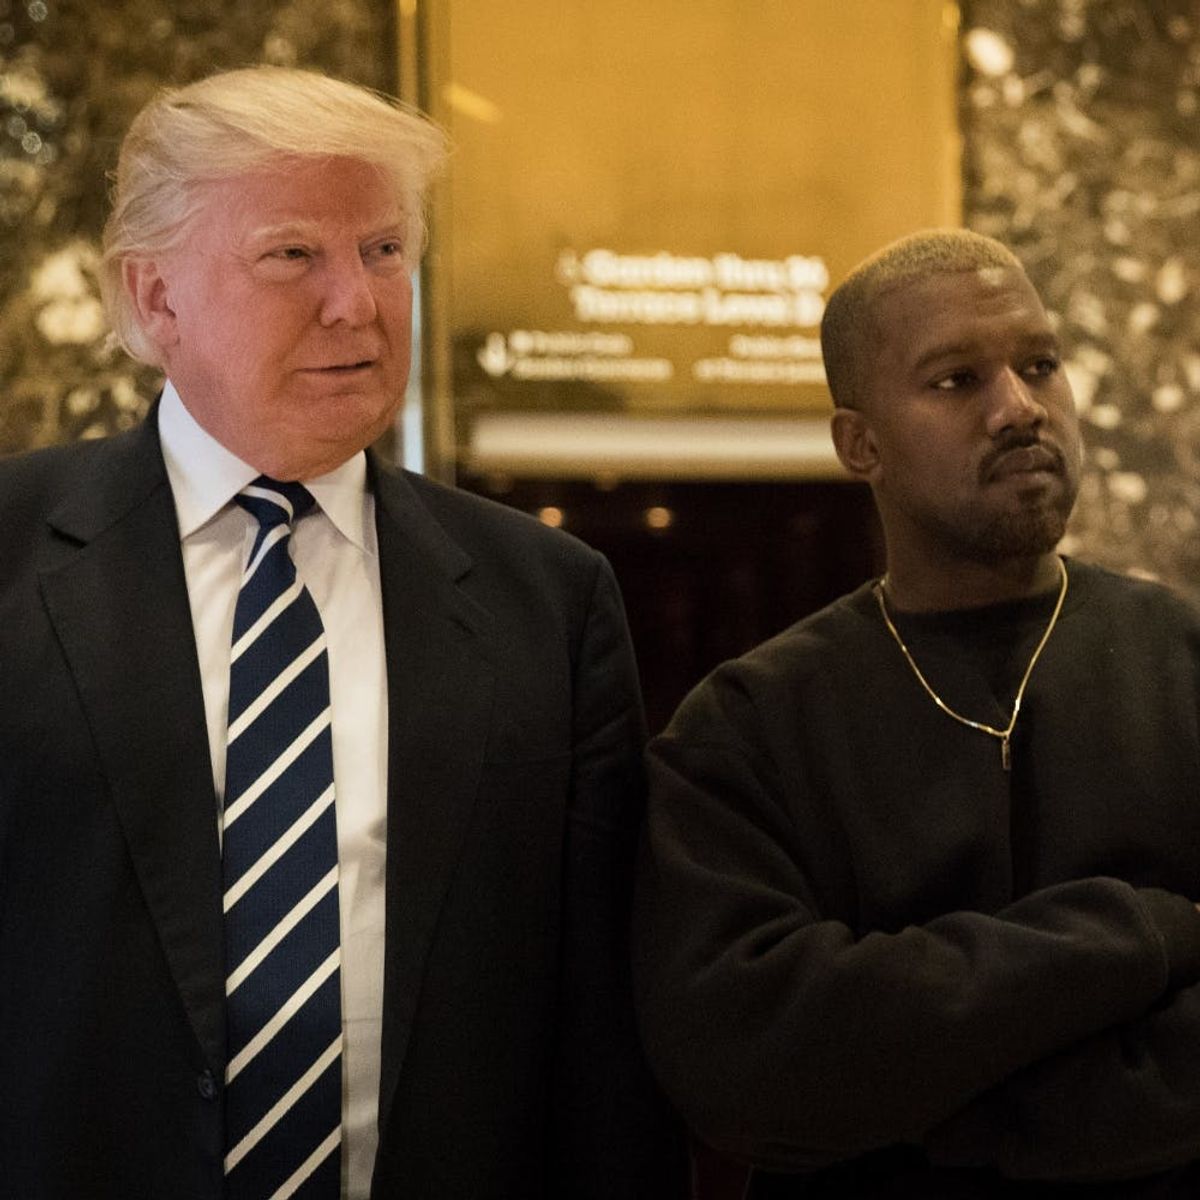 WTF?! Kanye West Met Up With Trump This Morning